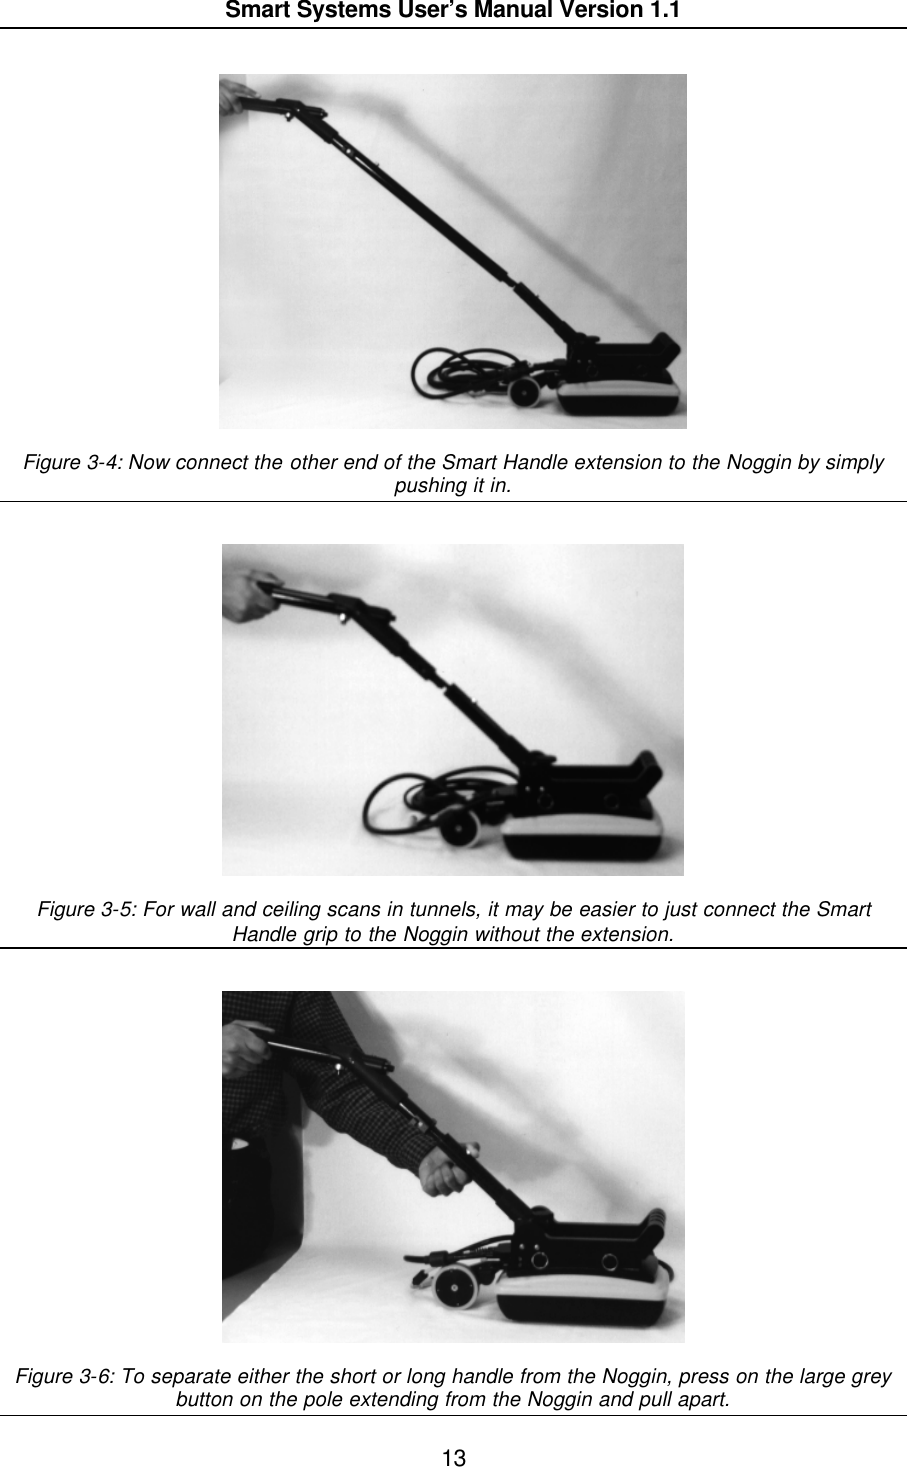  Smart Systems User’s Manual Version 1.1  13    Figure 3-4: Now connect the other end of the Smart Handle extension to the Noggin by simply pushing it in.      Figure 3-5: For wall and ceiling scans in tunnels, it may be easier to just connect the Smart Handle grip to the Noggin without the extension.      Figure 3-6: To separate either the short or long handle from the Noggin, press on the large grey button on the pole extending from the Noggin and pull apart.  